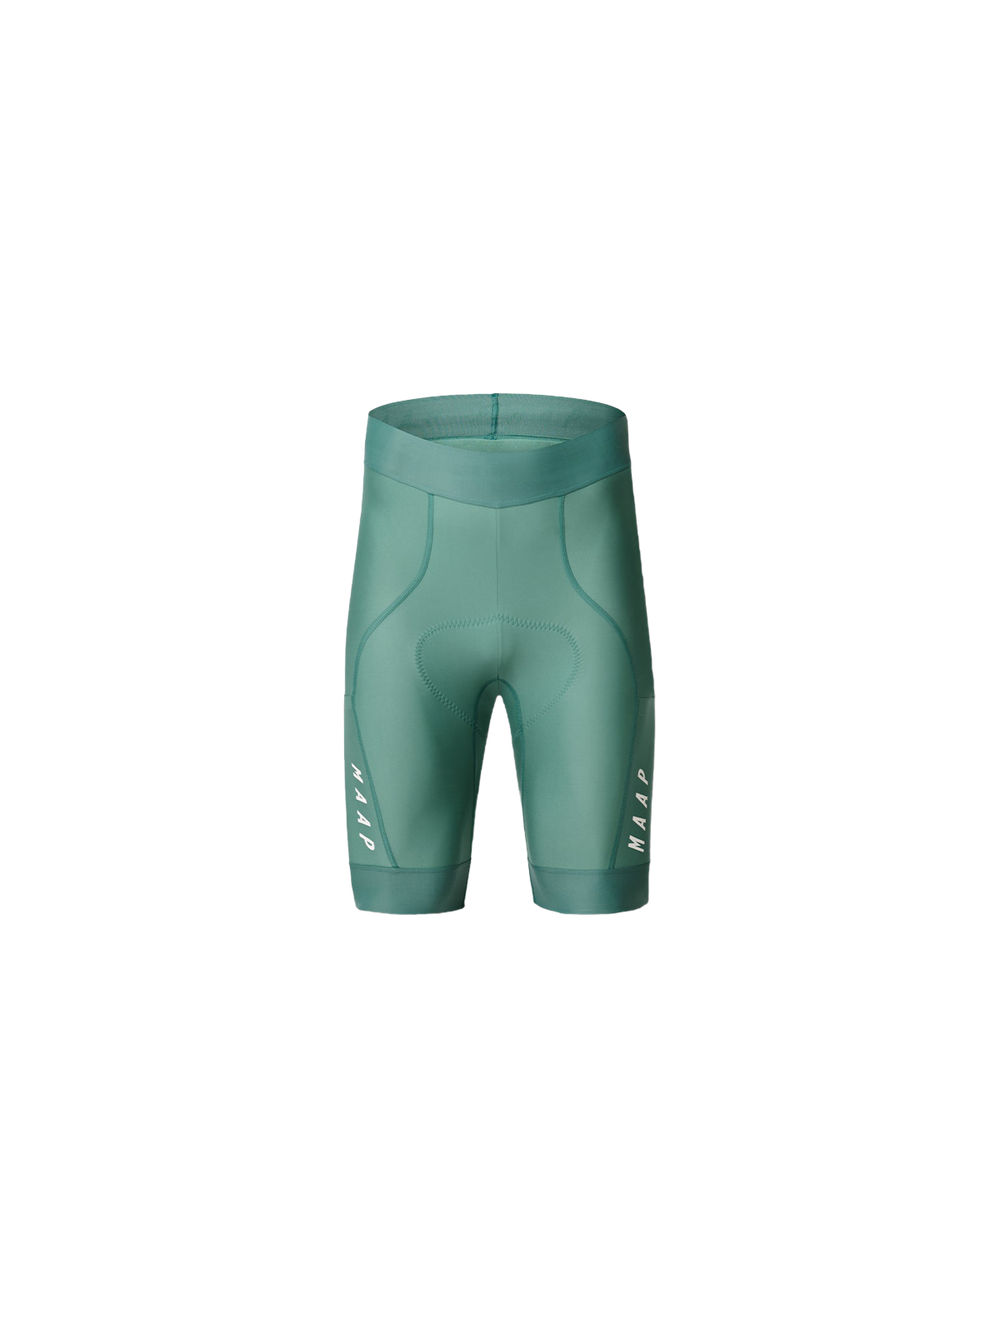 Product Image for Sequence Ride Short